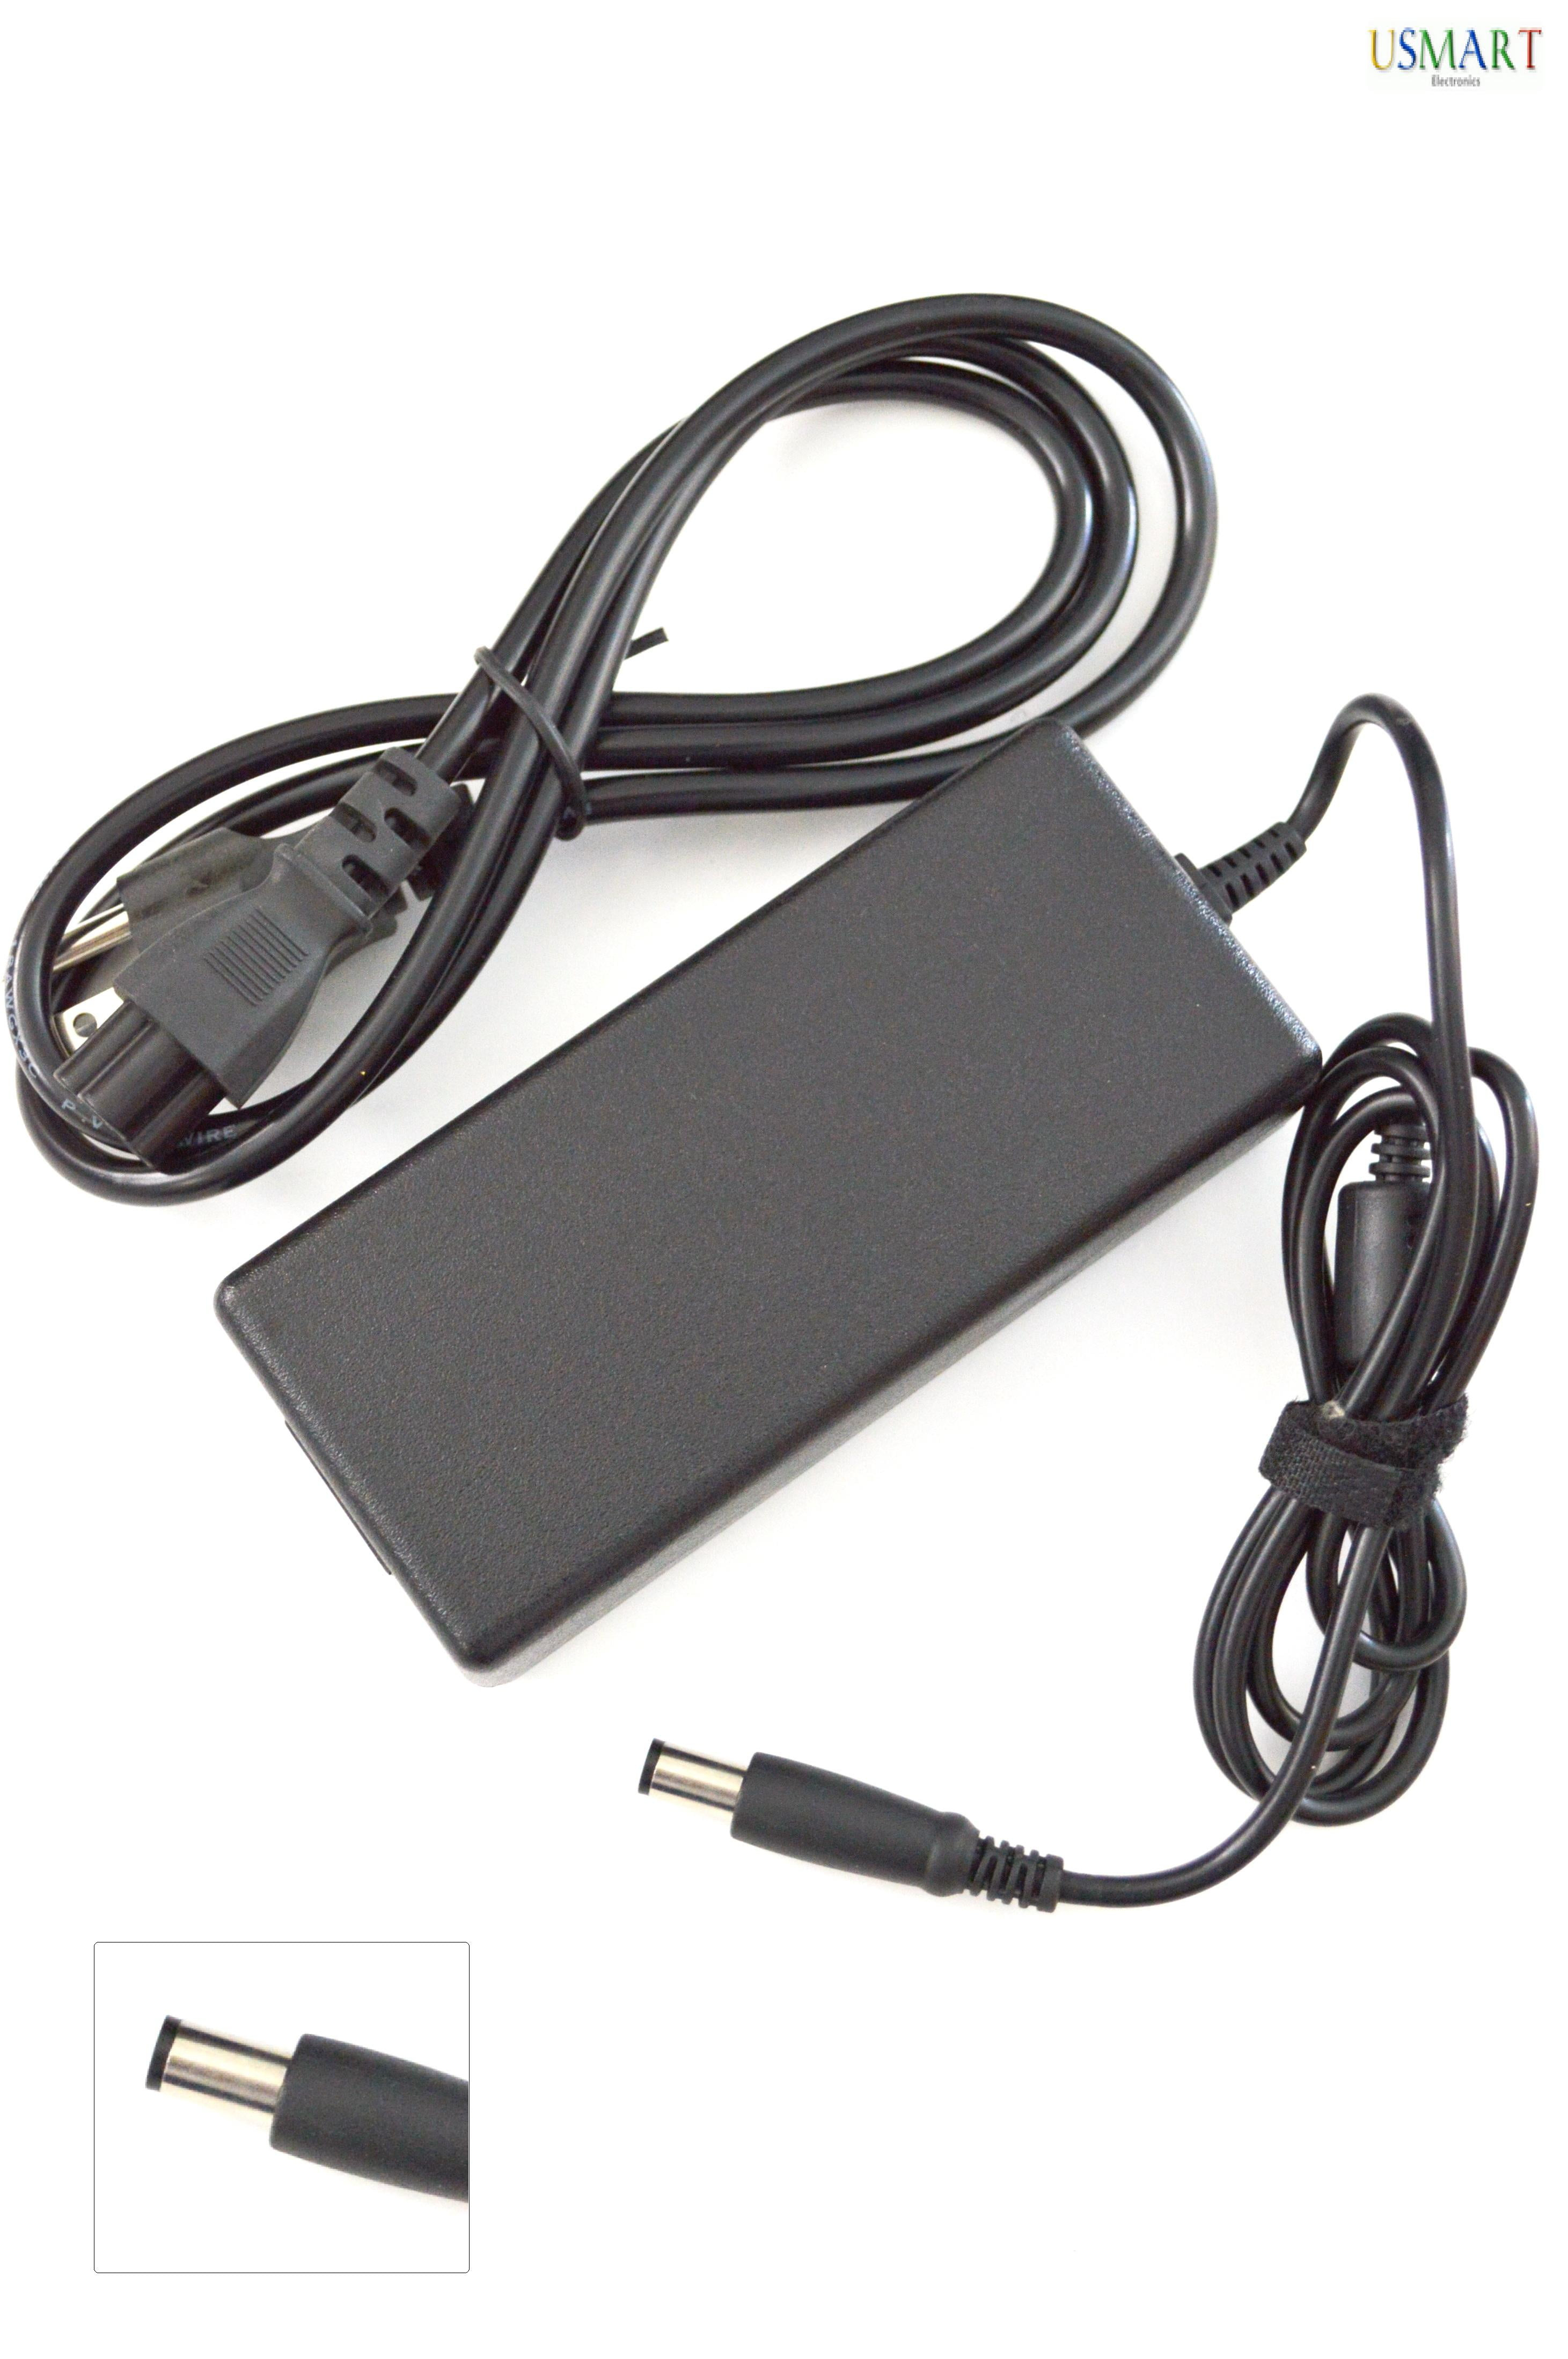 T-Power 65W Charger for HP Ac Adapter 2000-2B09CA 2000-2B10CA 2000-2B10NR 2000-2B19CA 2000-2B20CA 2000-2B20NR 2000-2B22DX 2000-2B24NR 2000-2B28CA 2000-2B29WM 2000-2B30DX 463598-001 G42-250BR XJ257LA Replacement Switching Power Supply Cord Charger 